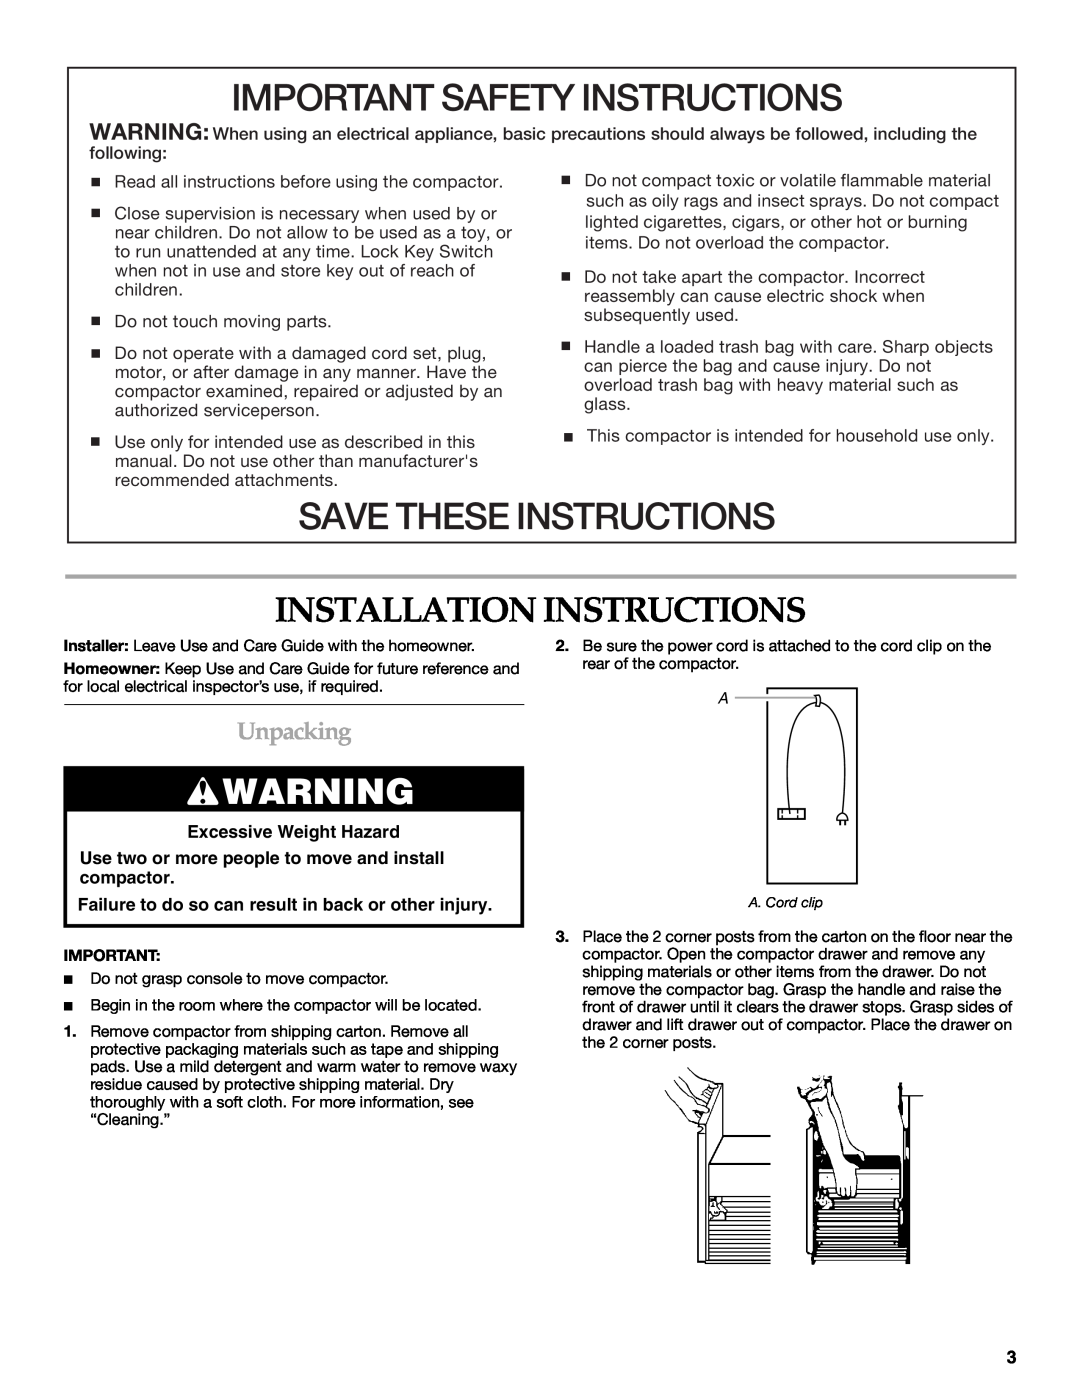 KitchenAid 9871915B manual Installation Instructions, Unpacking, Excessive Weight Hazard, Important Safety Instructions 